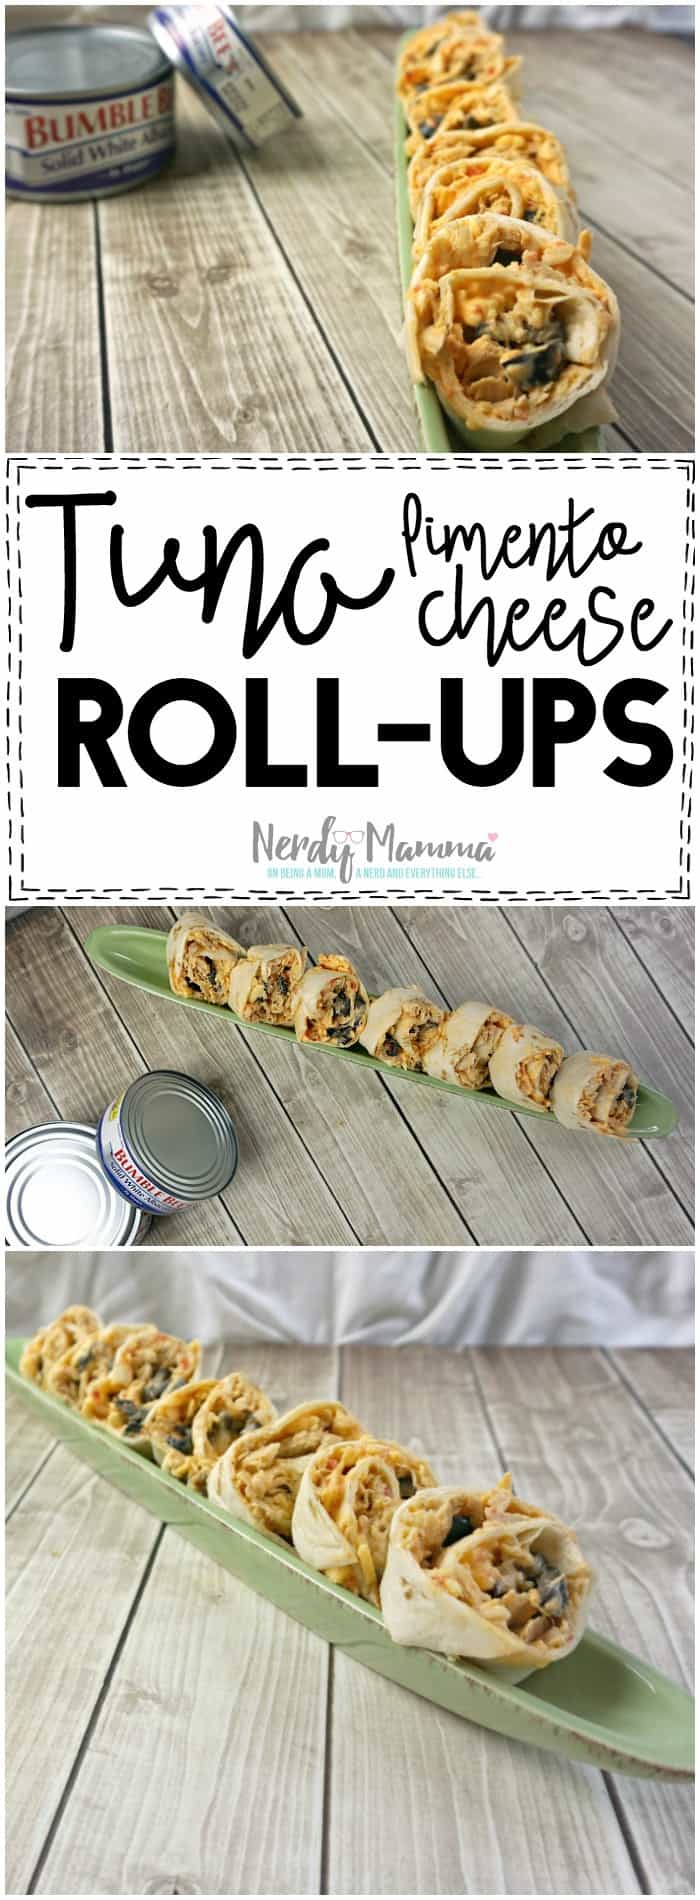 This recipe for Tuna & Pimento Cheese Roll-ups is so easy! I could make them for the kids for an after school snack--or for my lunch! LOL!